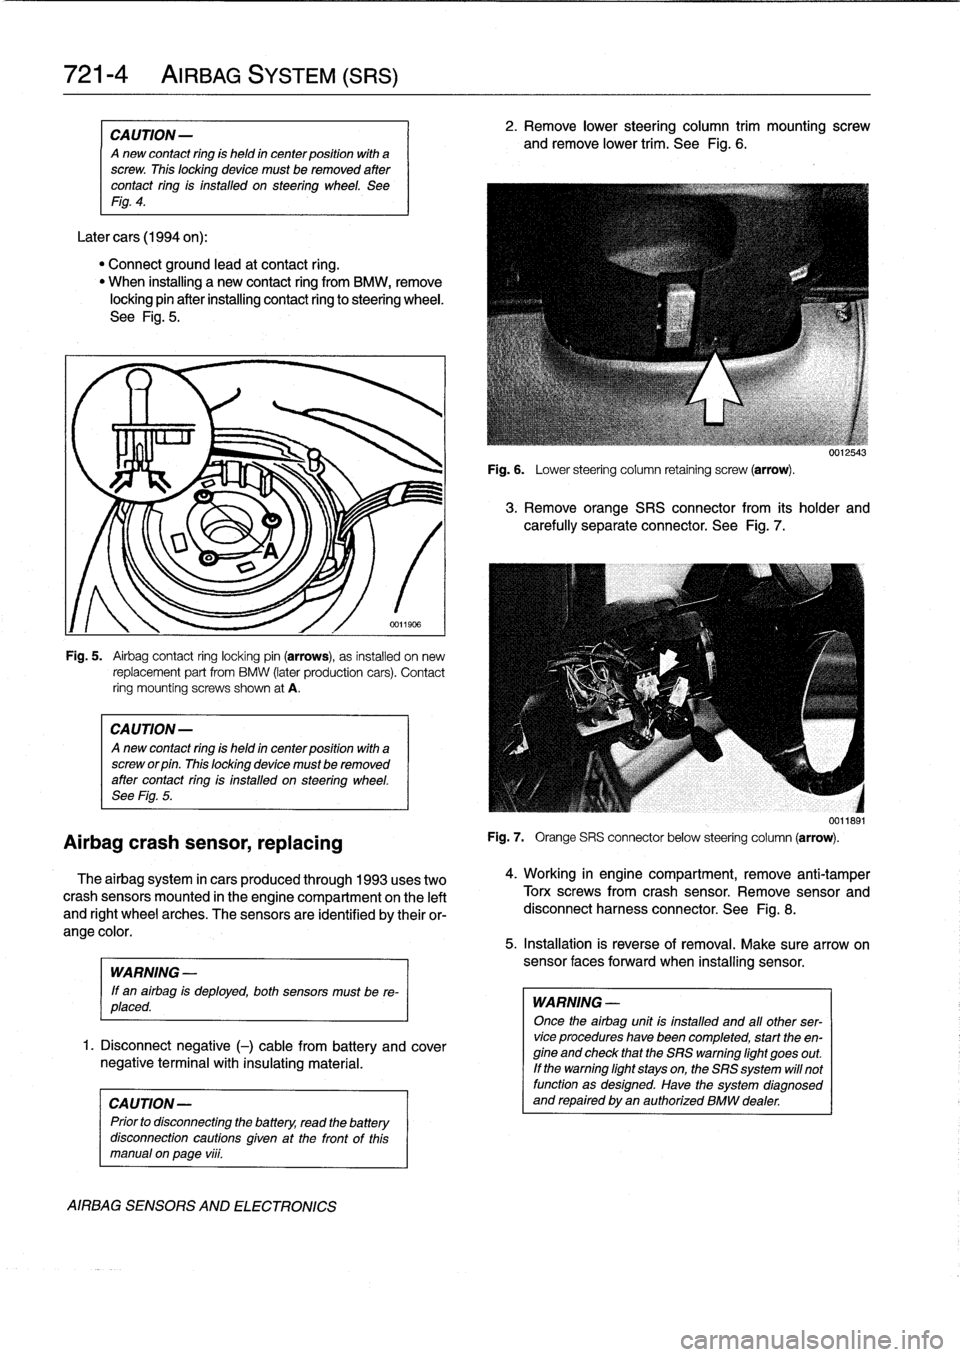 BMW 323i 1997 E36 Owners Manual 
721-
4

	

AIRBAG
SYSTEM
(SRS)

CAUTION-

A
new
contact
ring
is
held
in
center
position
with
a
screw
.
This
locking
device
must
be
removed
after
contact
ring
is
installed
on
steering
wheel
.
See
Fig
